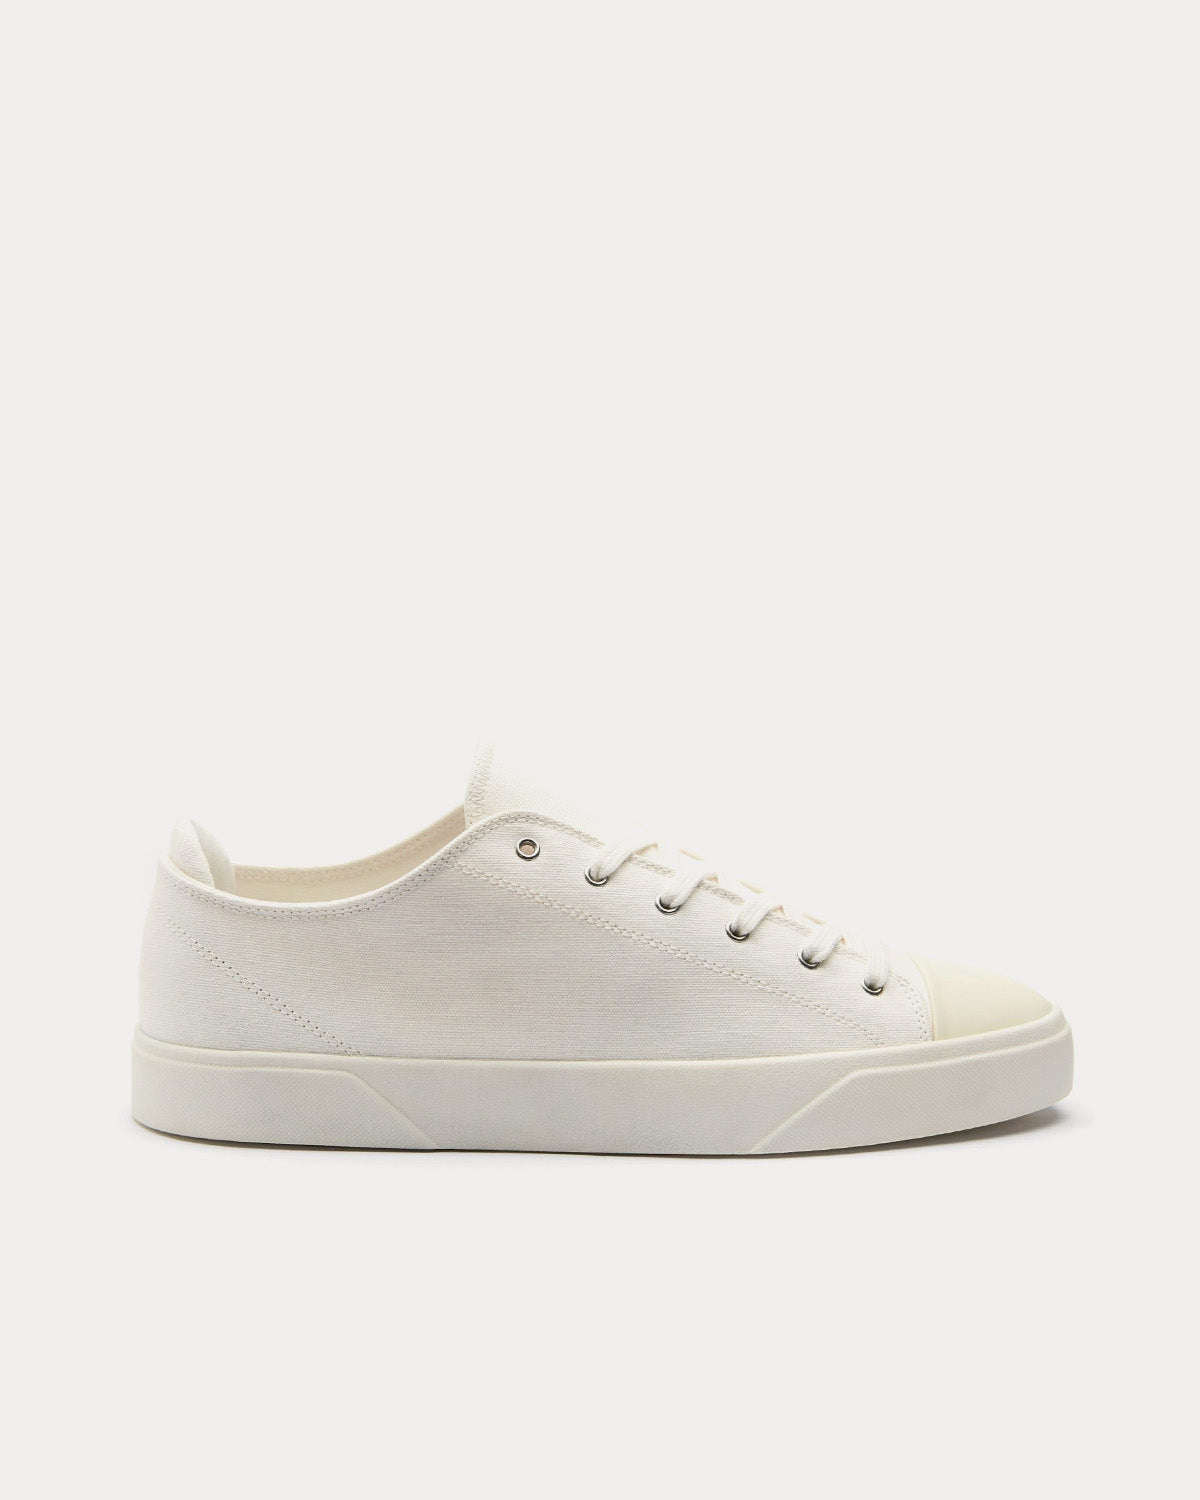 Vor - 1E Leinweiss Off-White Low Top Sneakers